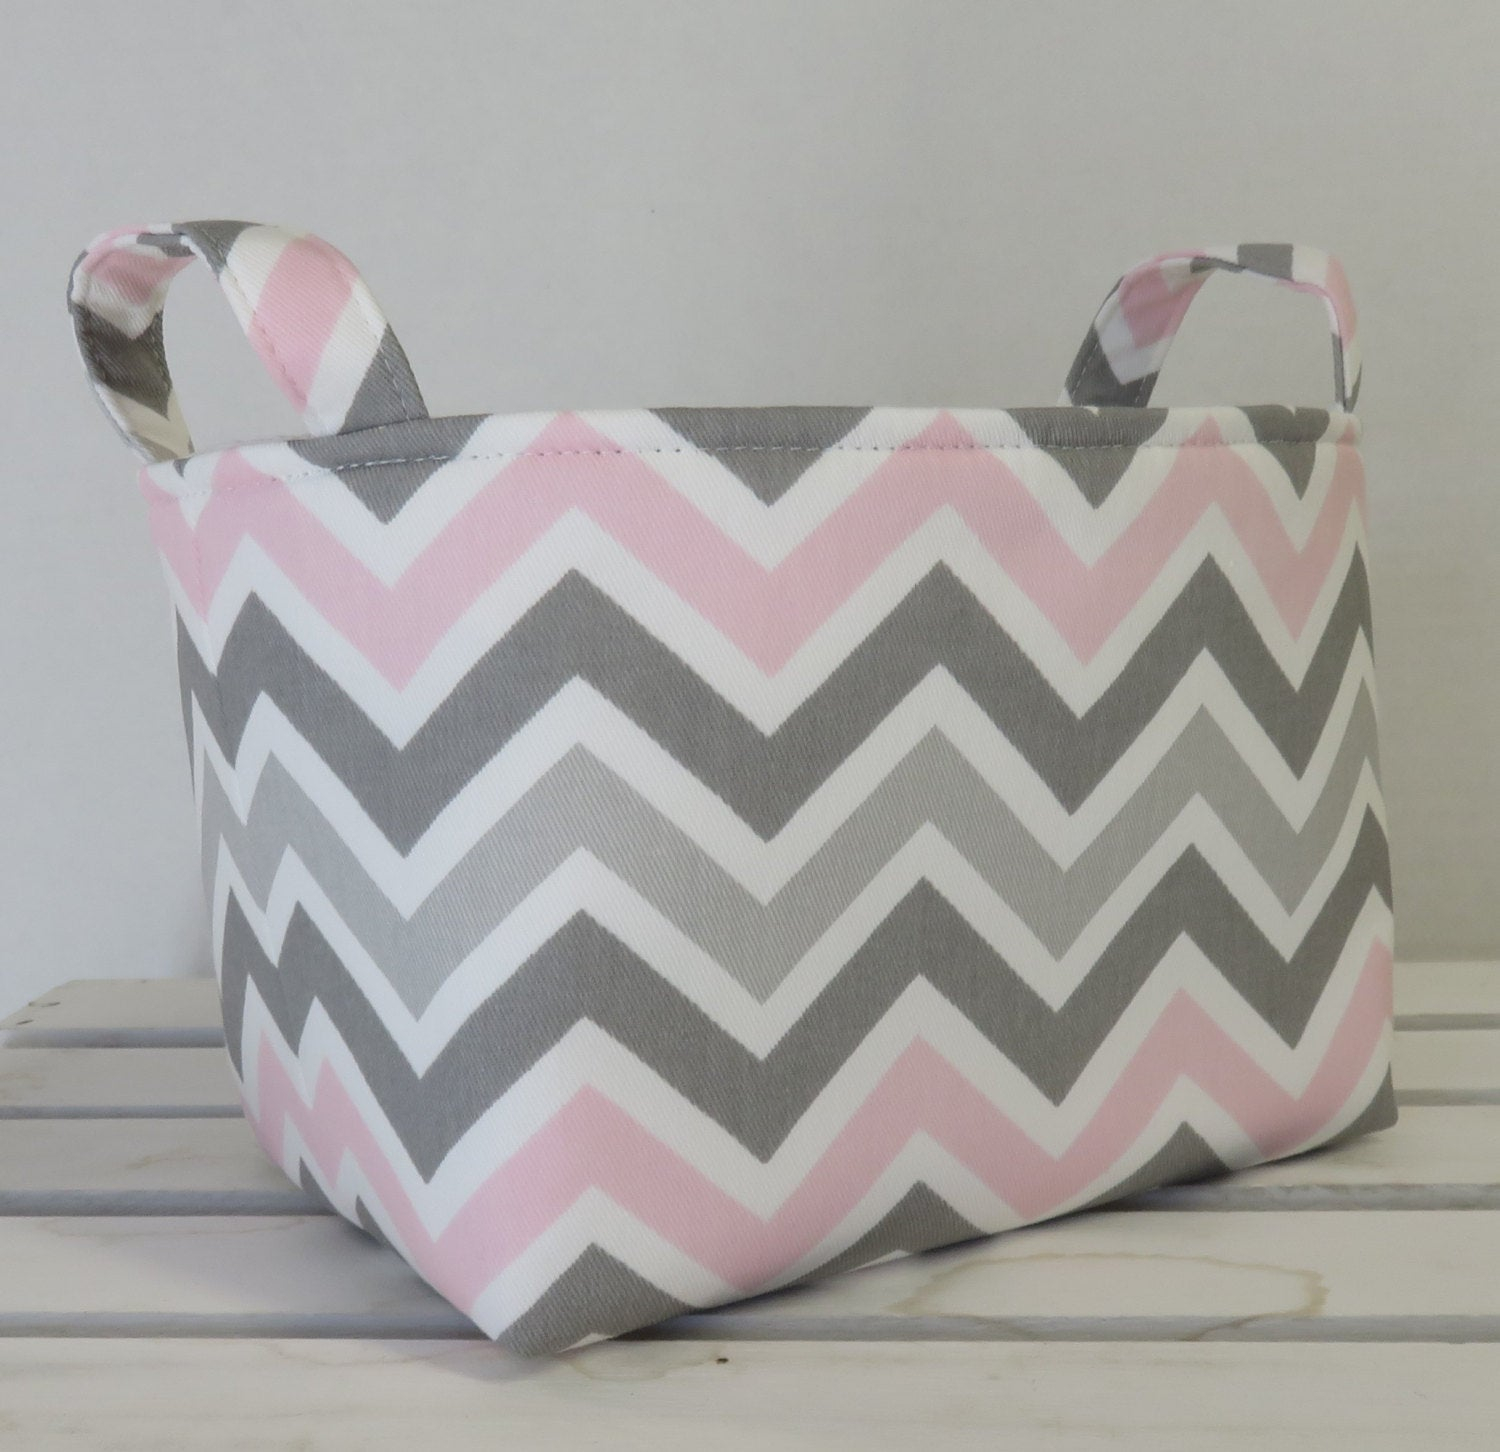 Storage Fabric Organizer Bin Container Basket Light Pink Gray White Zoom Zoom Chevron Zigzag Zig Zag Fabric Chose Your Inside Fabric pertaining to dimensions 1500 X 1452